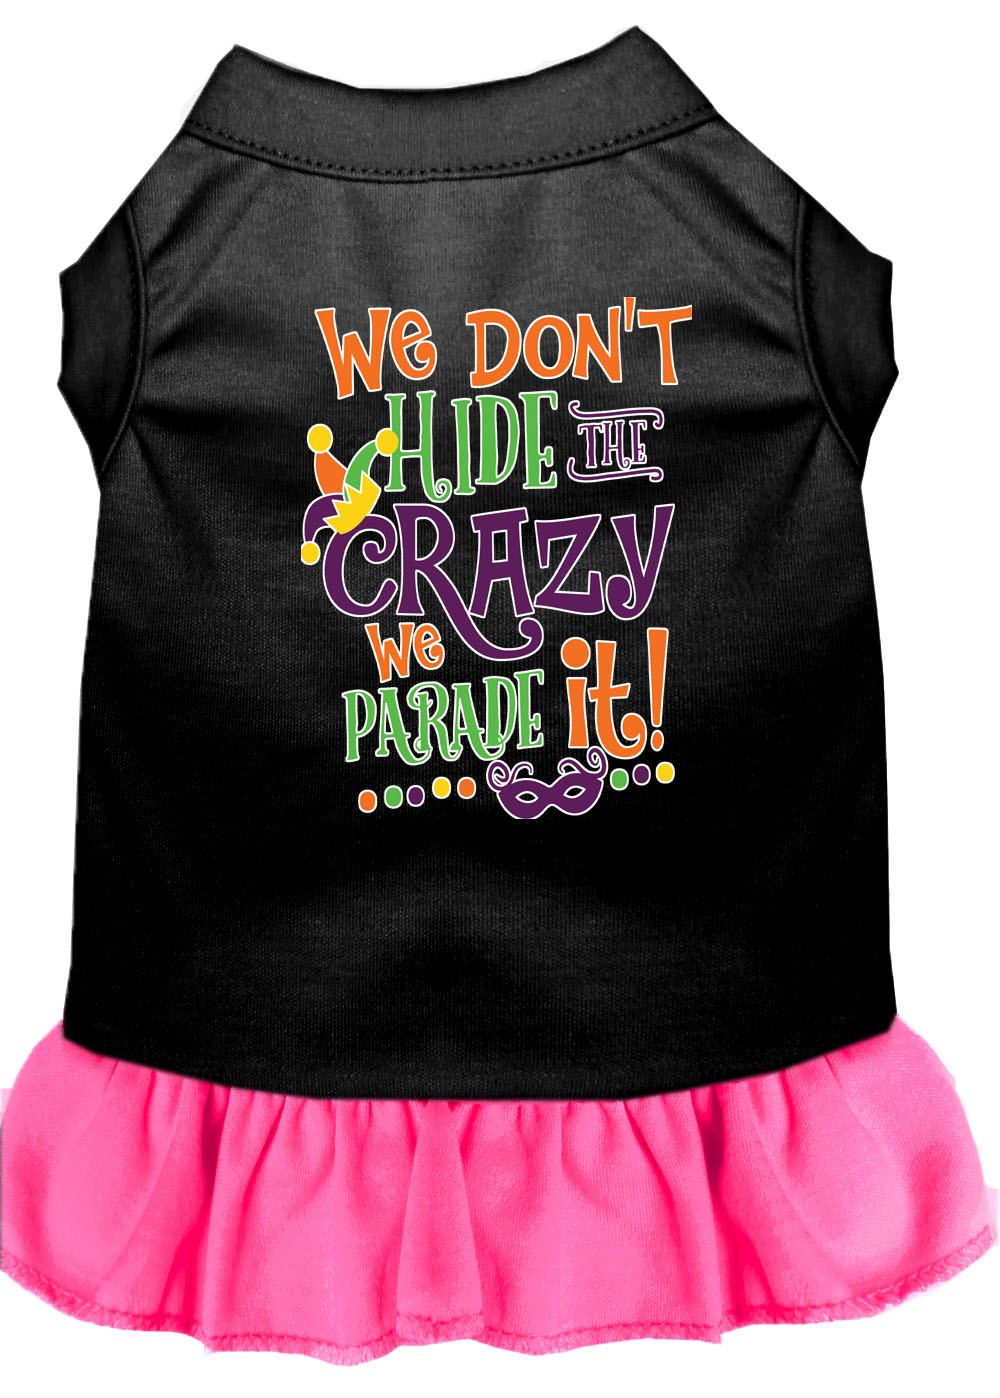 We Don't Hide the Crazy Screen Print Mardi Gras Dog Dress Black with Bright Pink XS